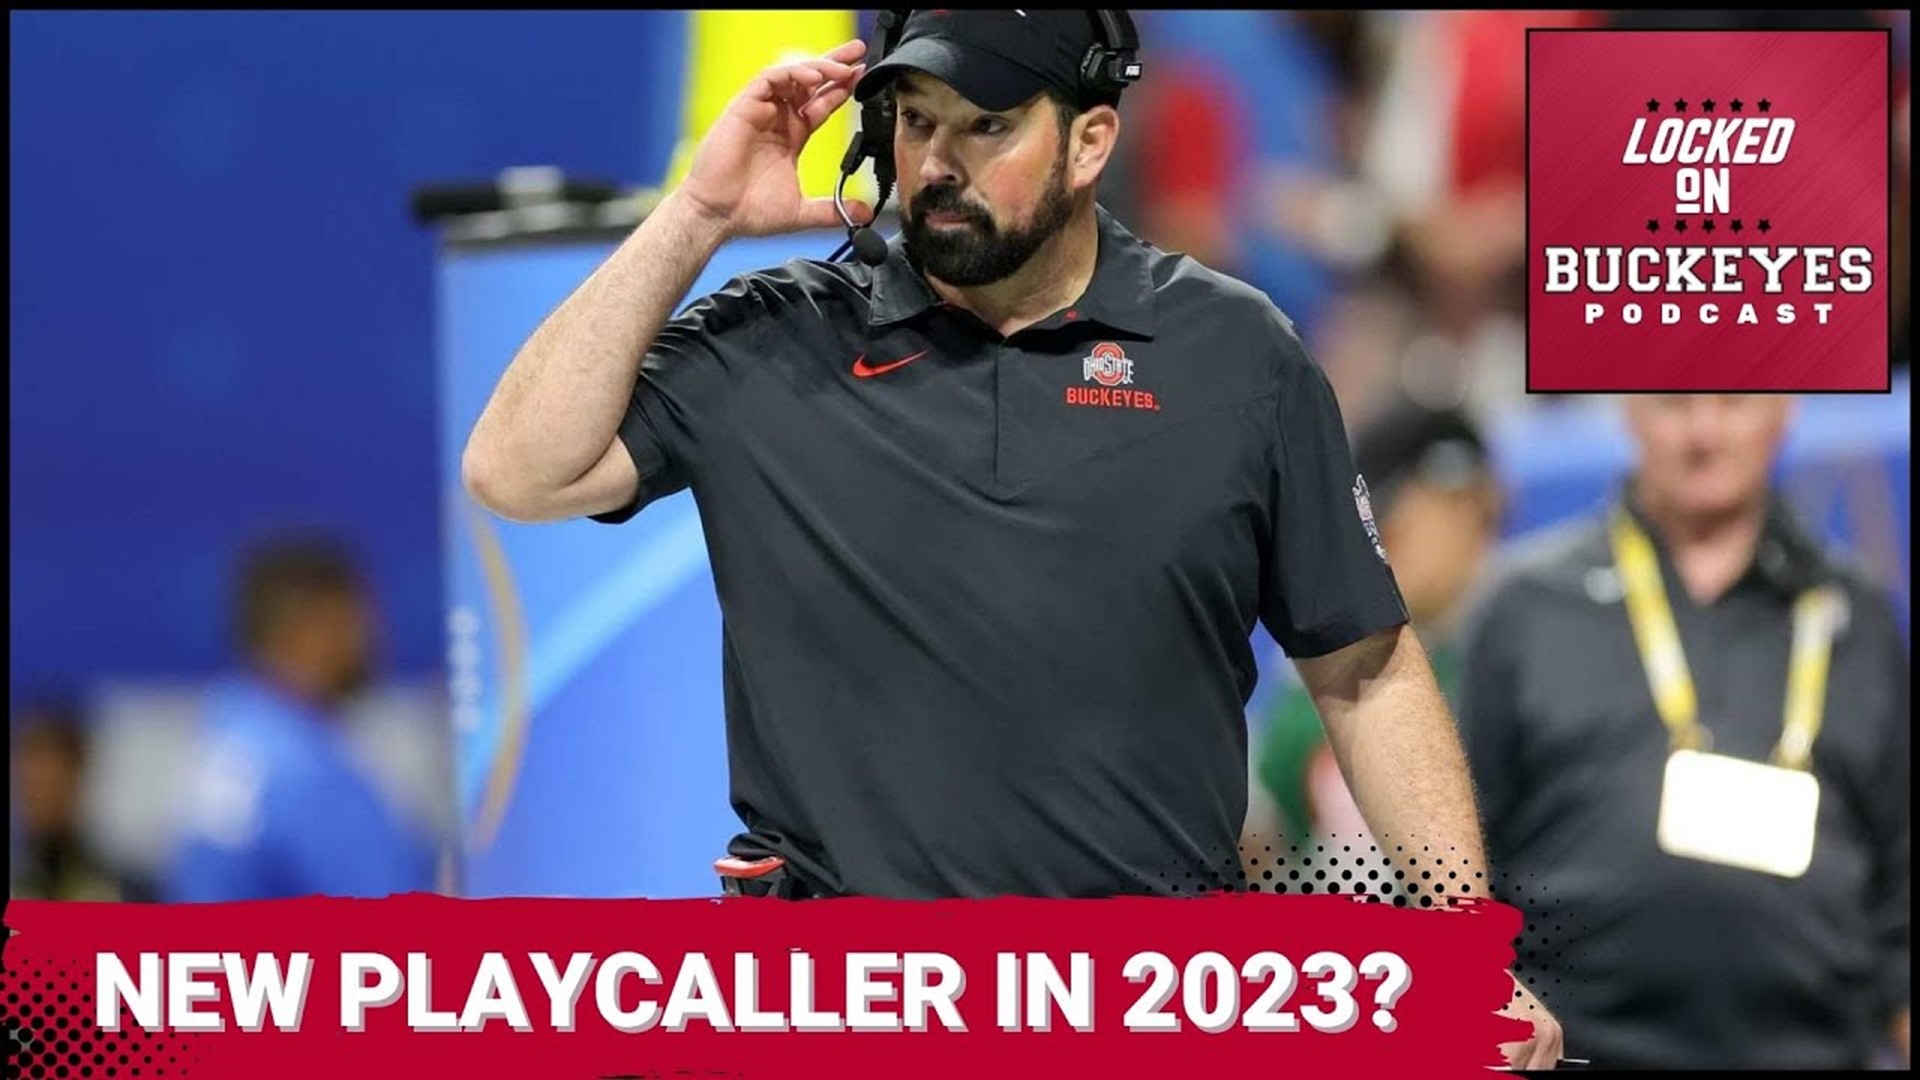 The 2023 college football season could see a first for Ohio State coach Ryan Day.